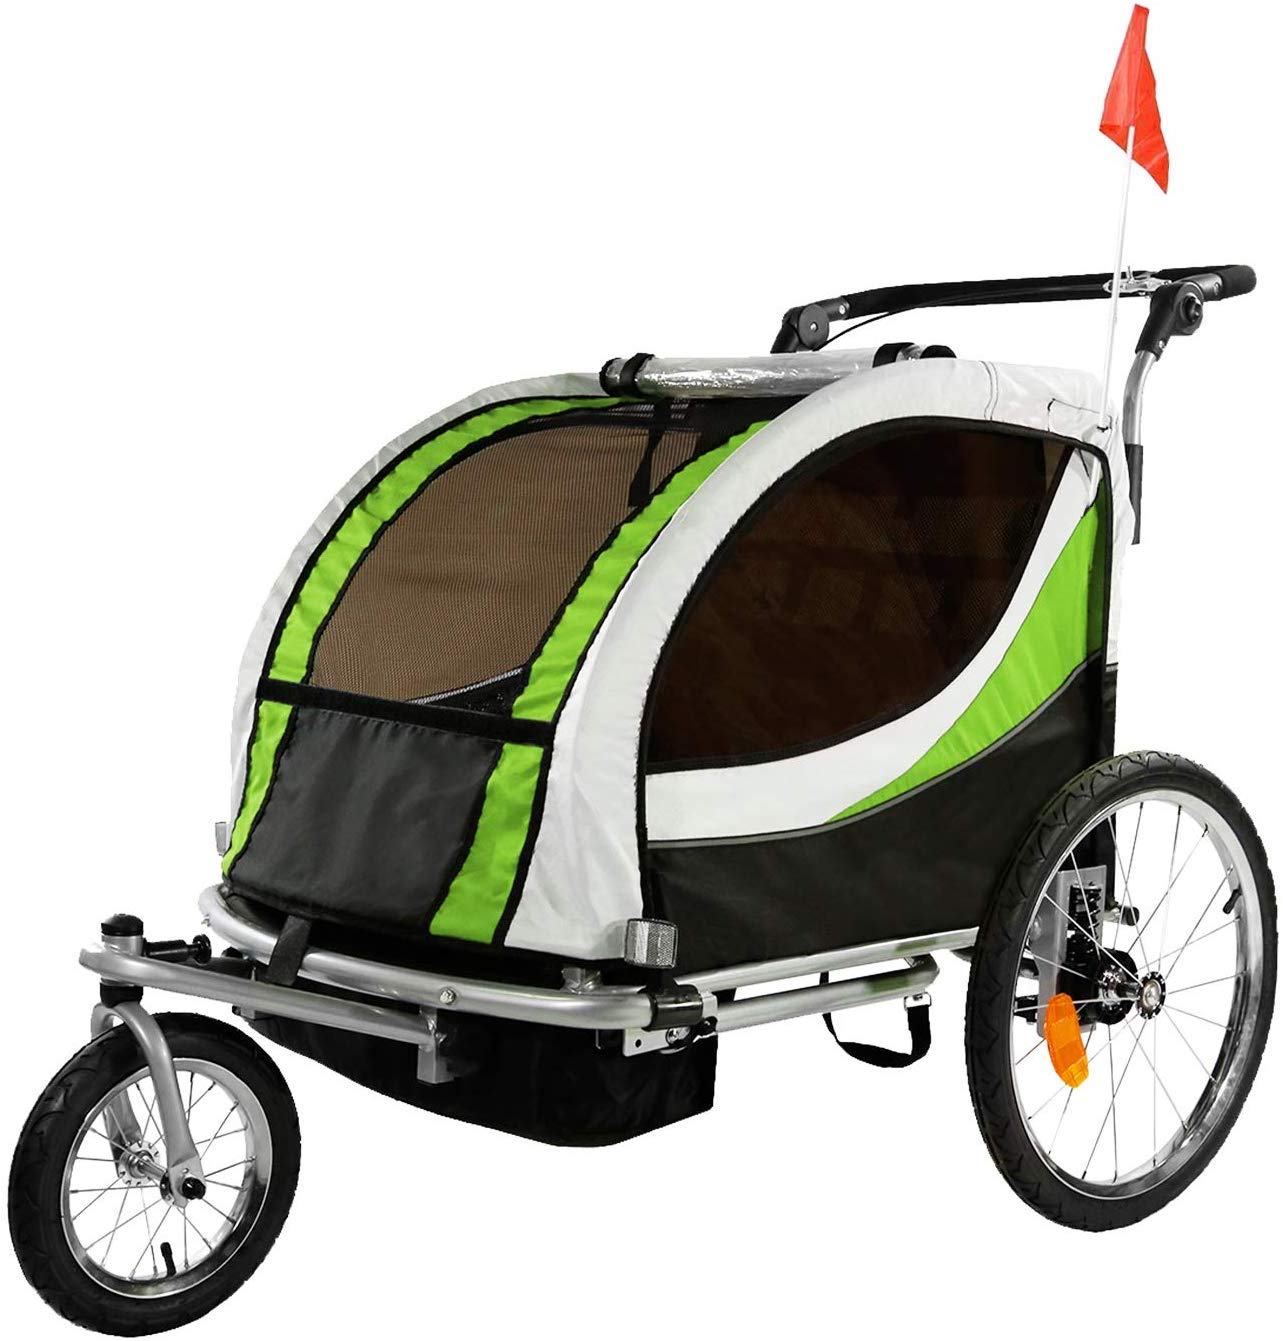 Clevr Deluxe 3-in-1 Double Seat Bike Trailer